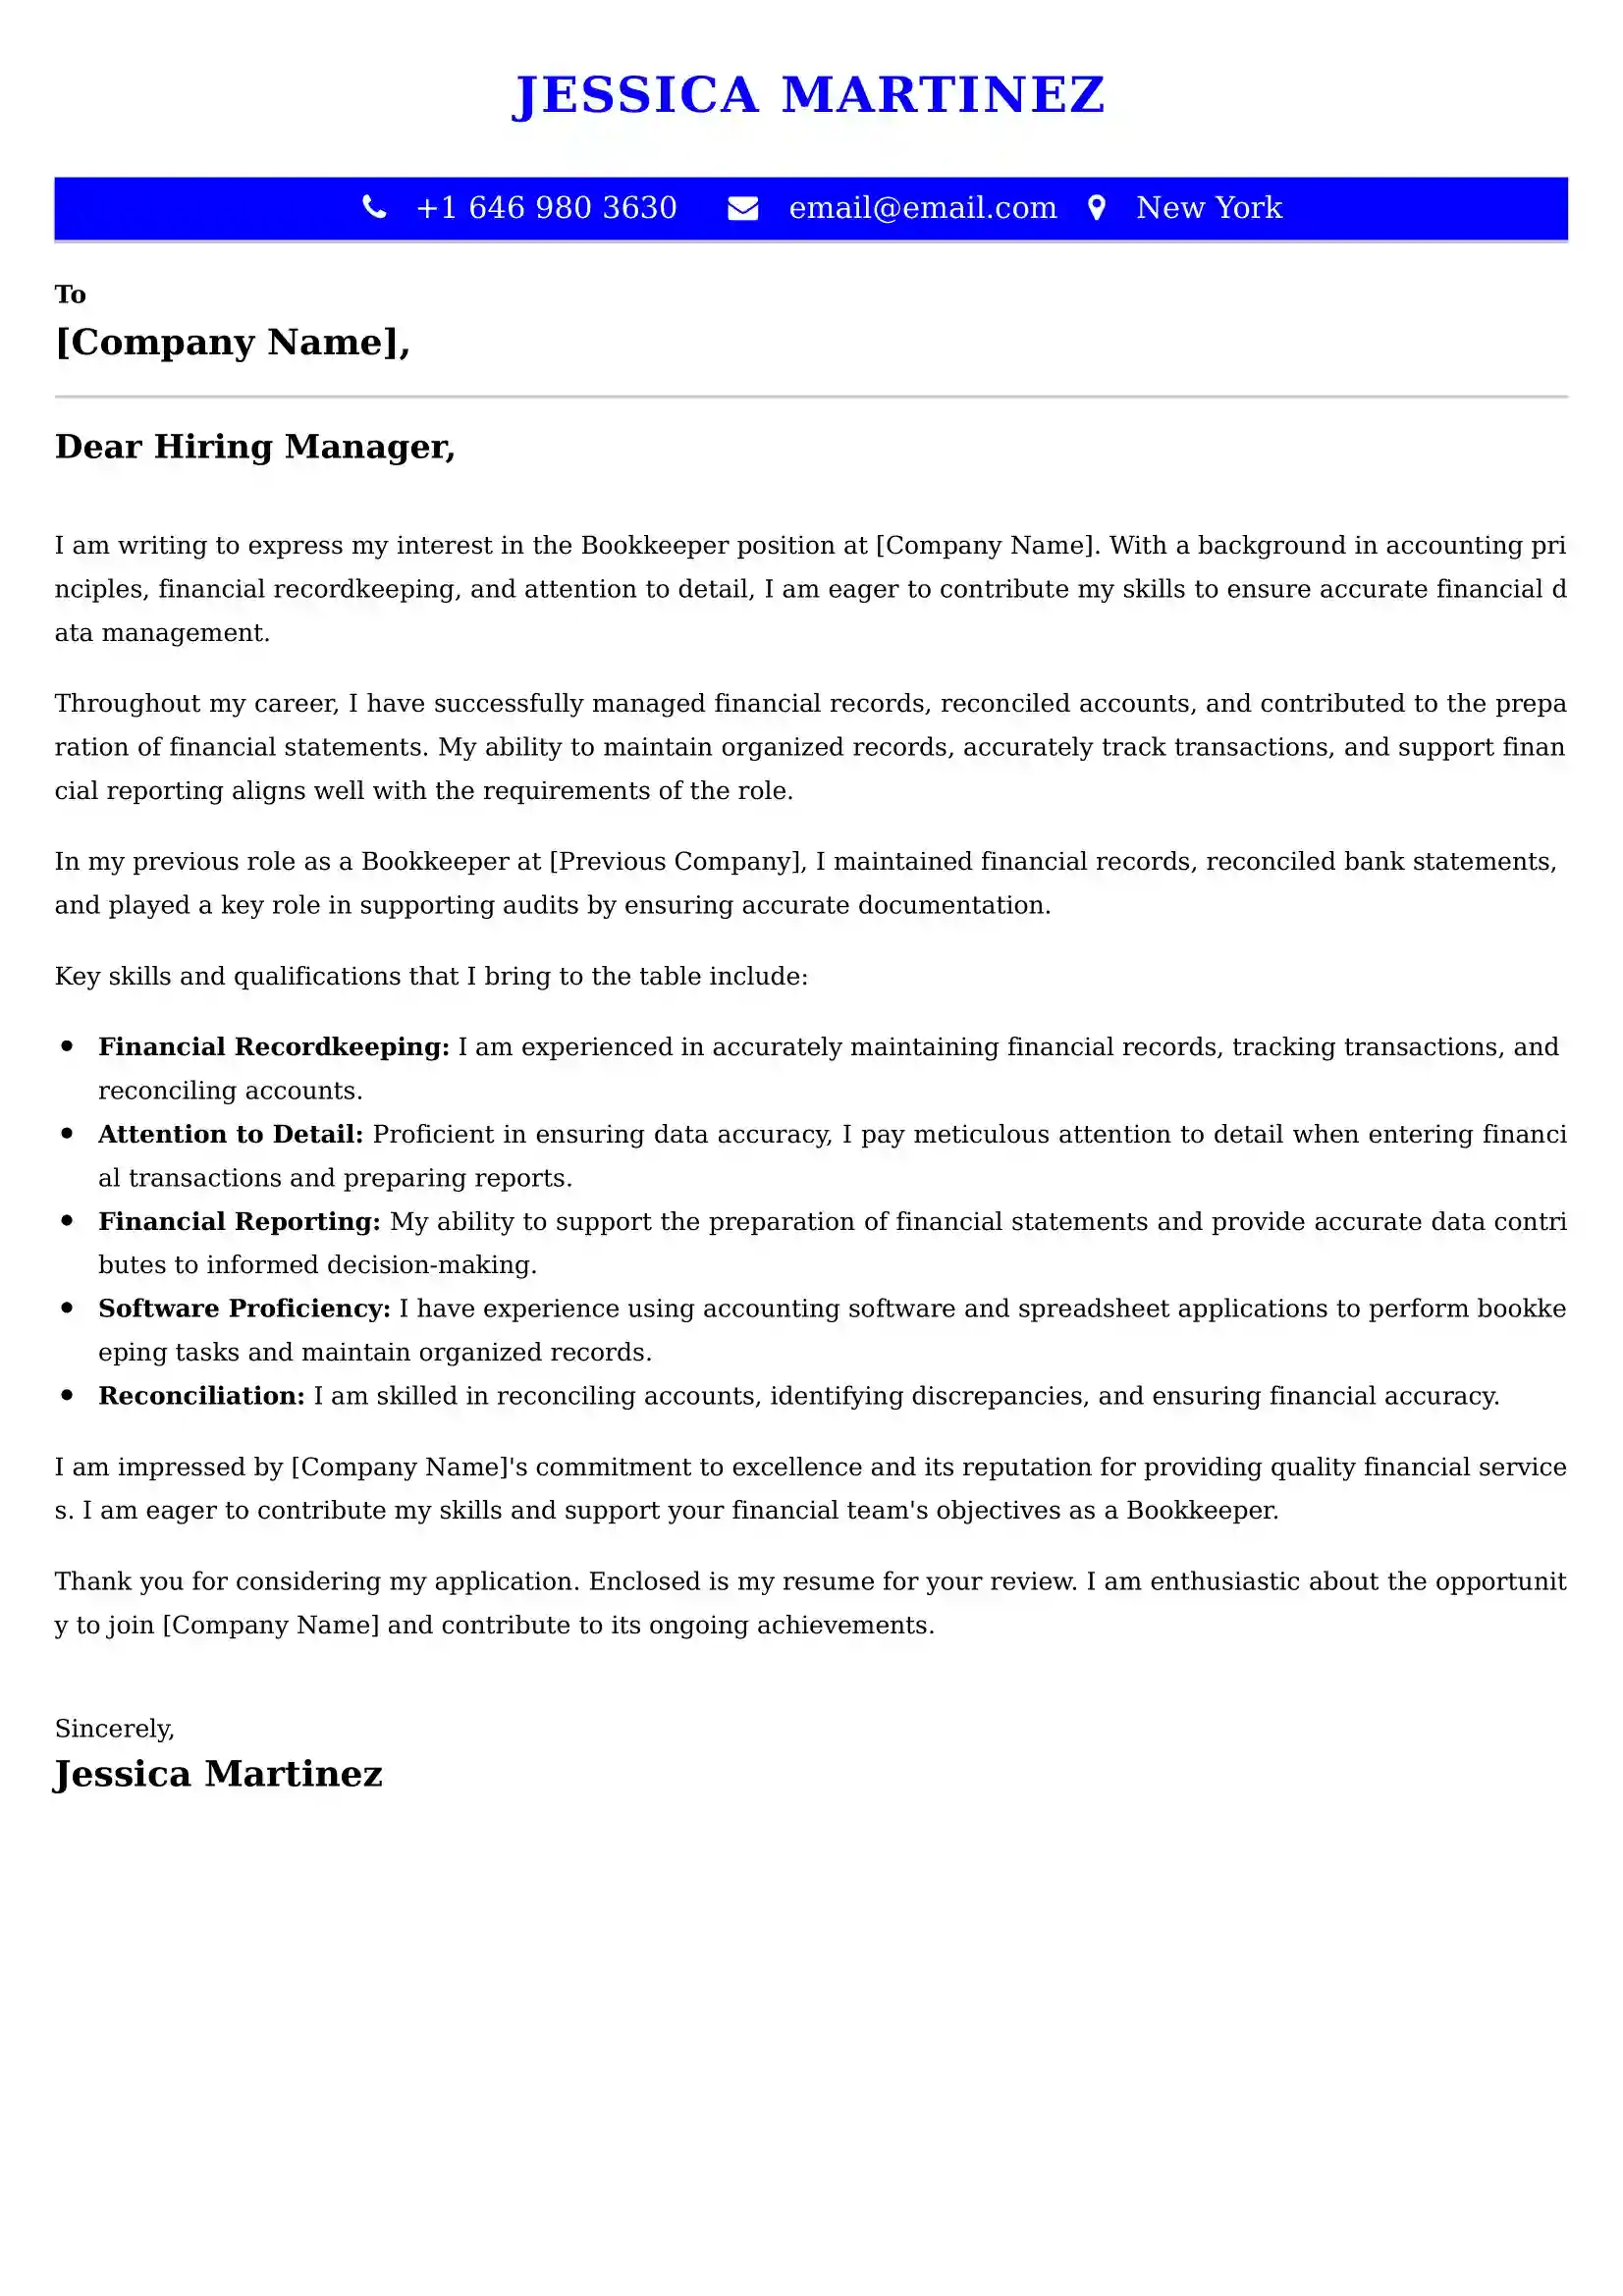 Bookkeeper Cover Letter Examples - Latest UK Format